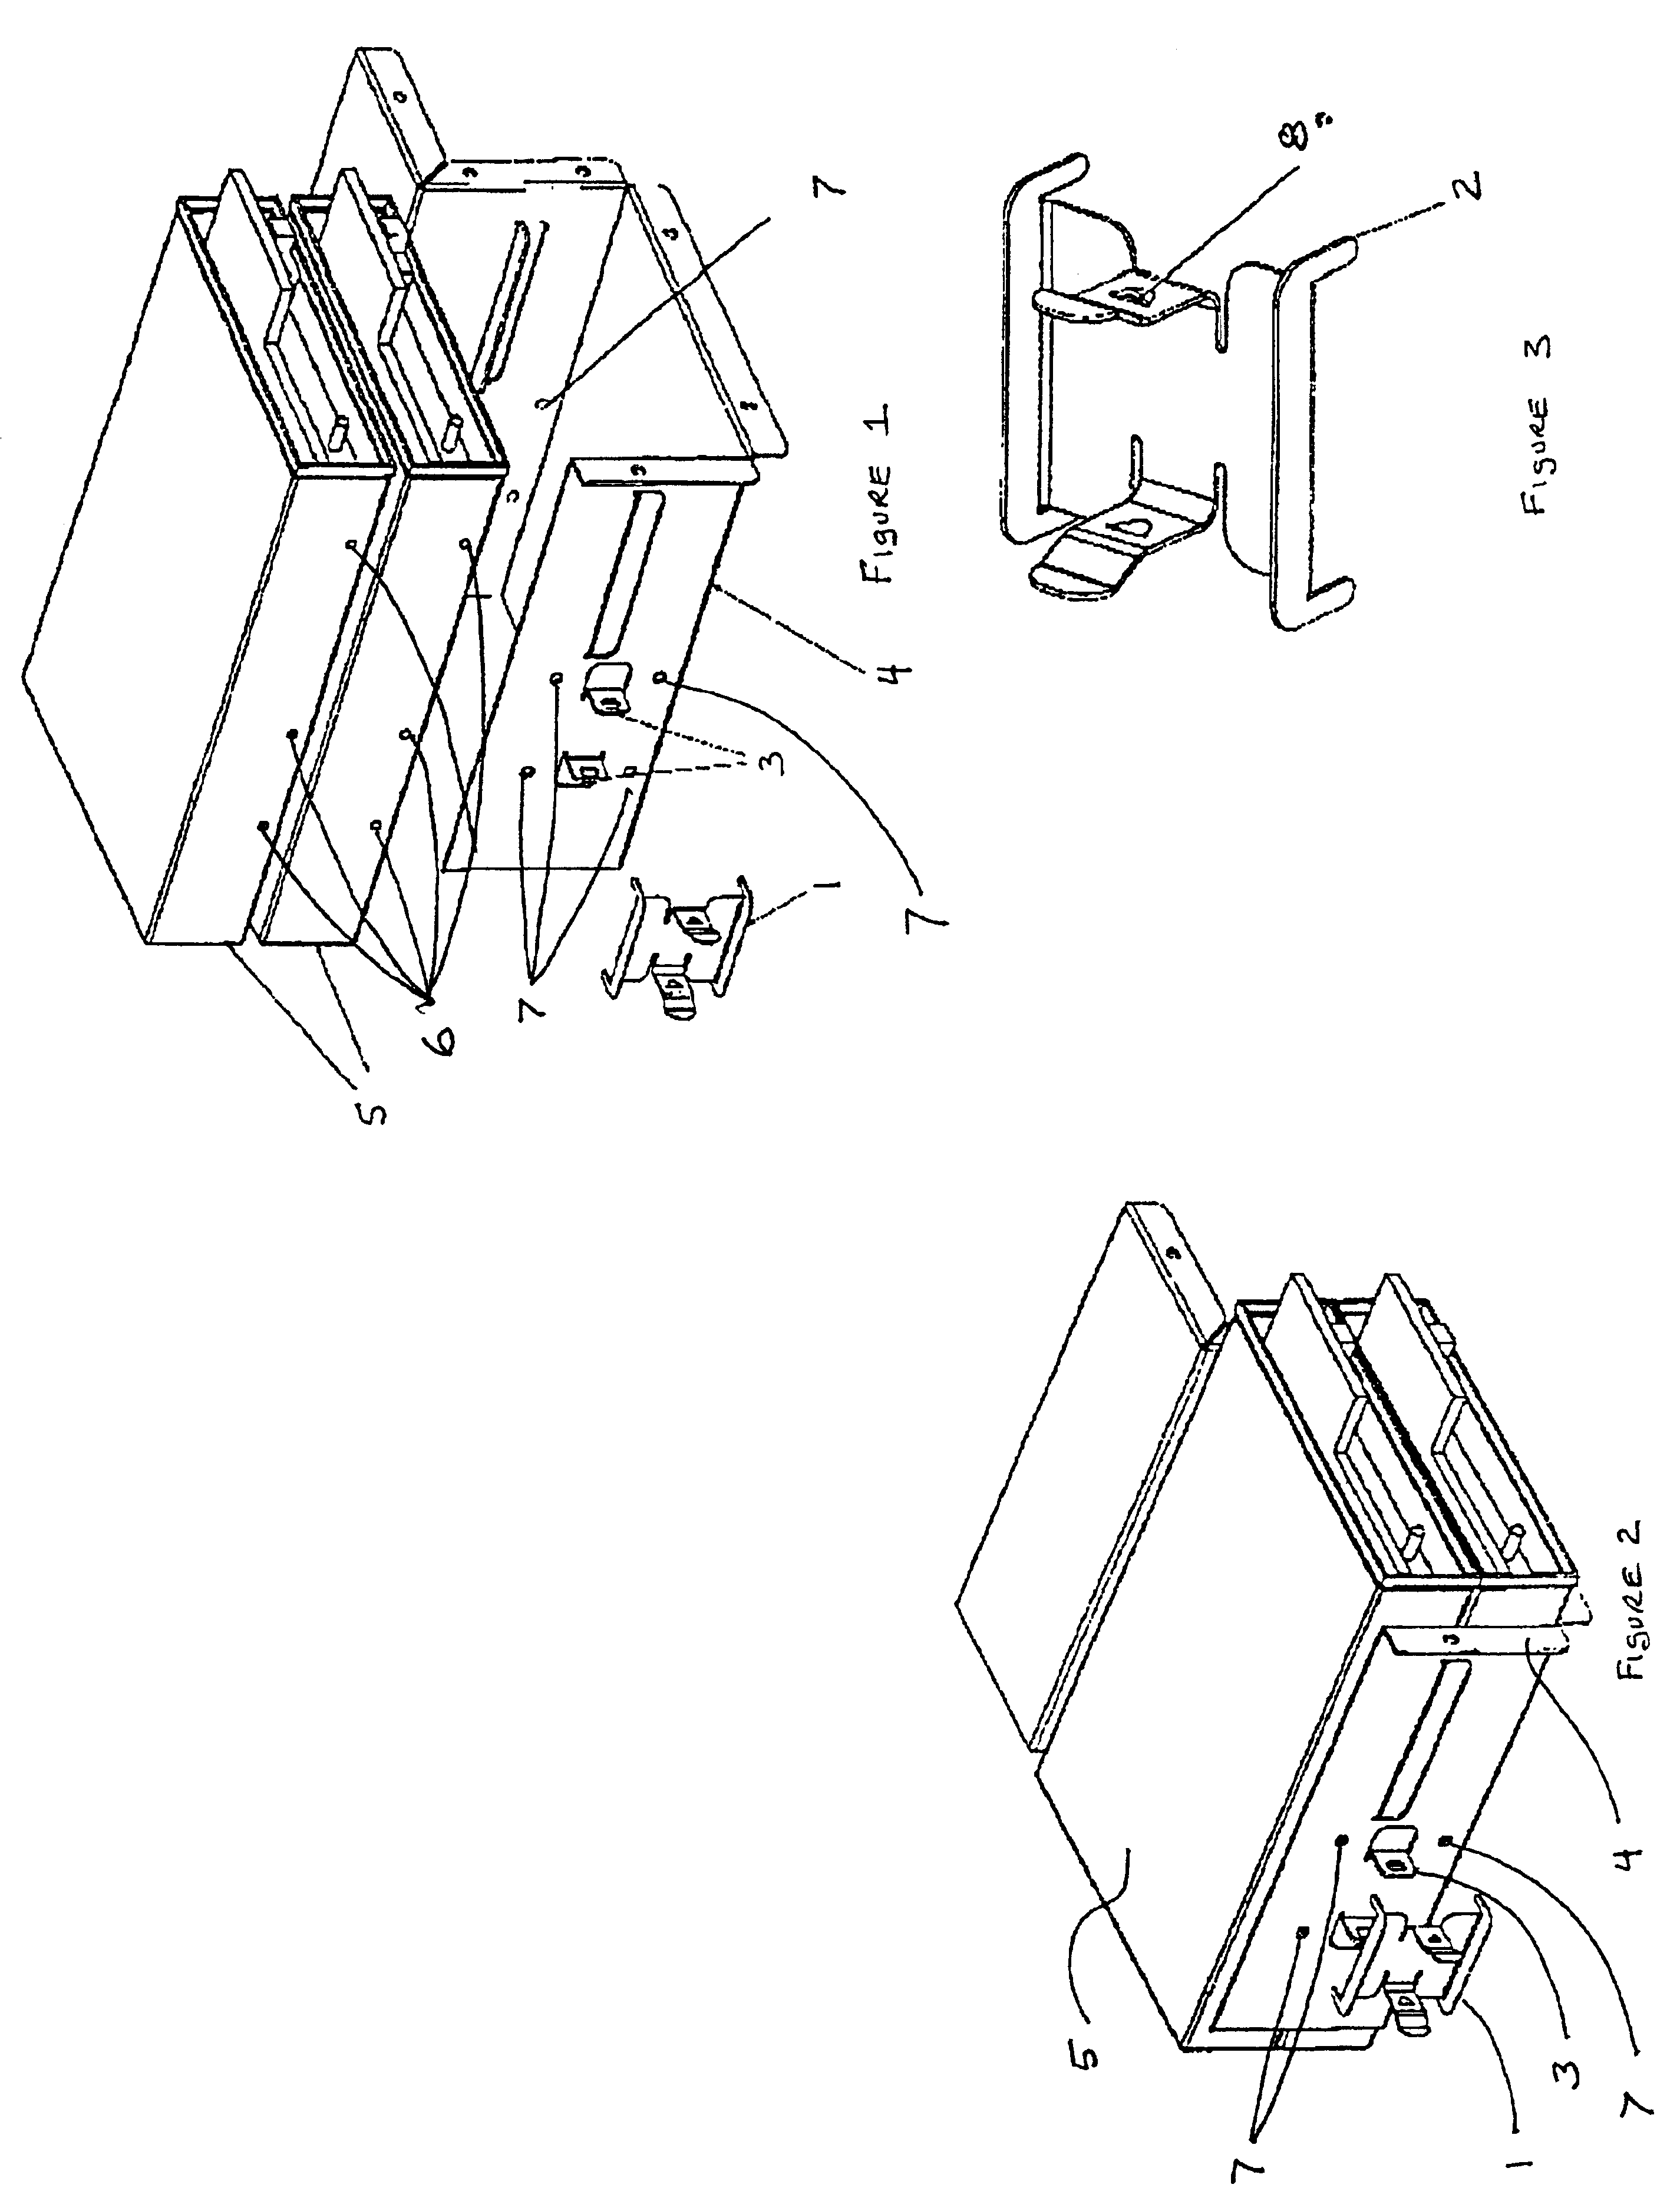 Screw less clip mounted computer drive